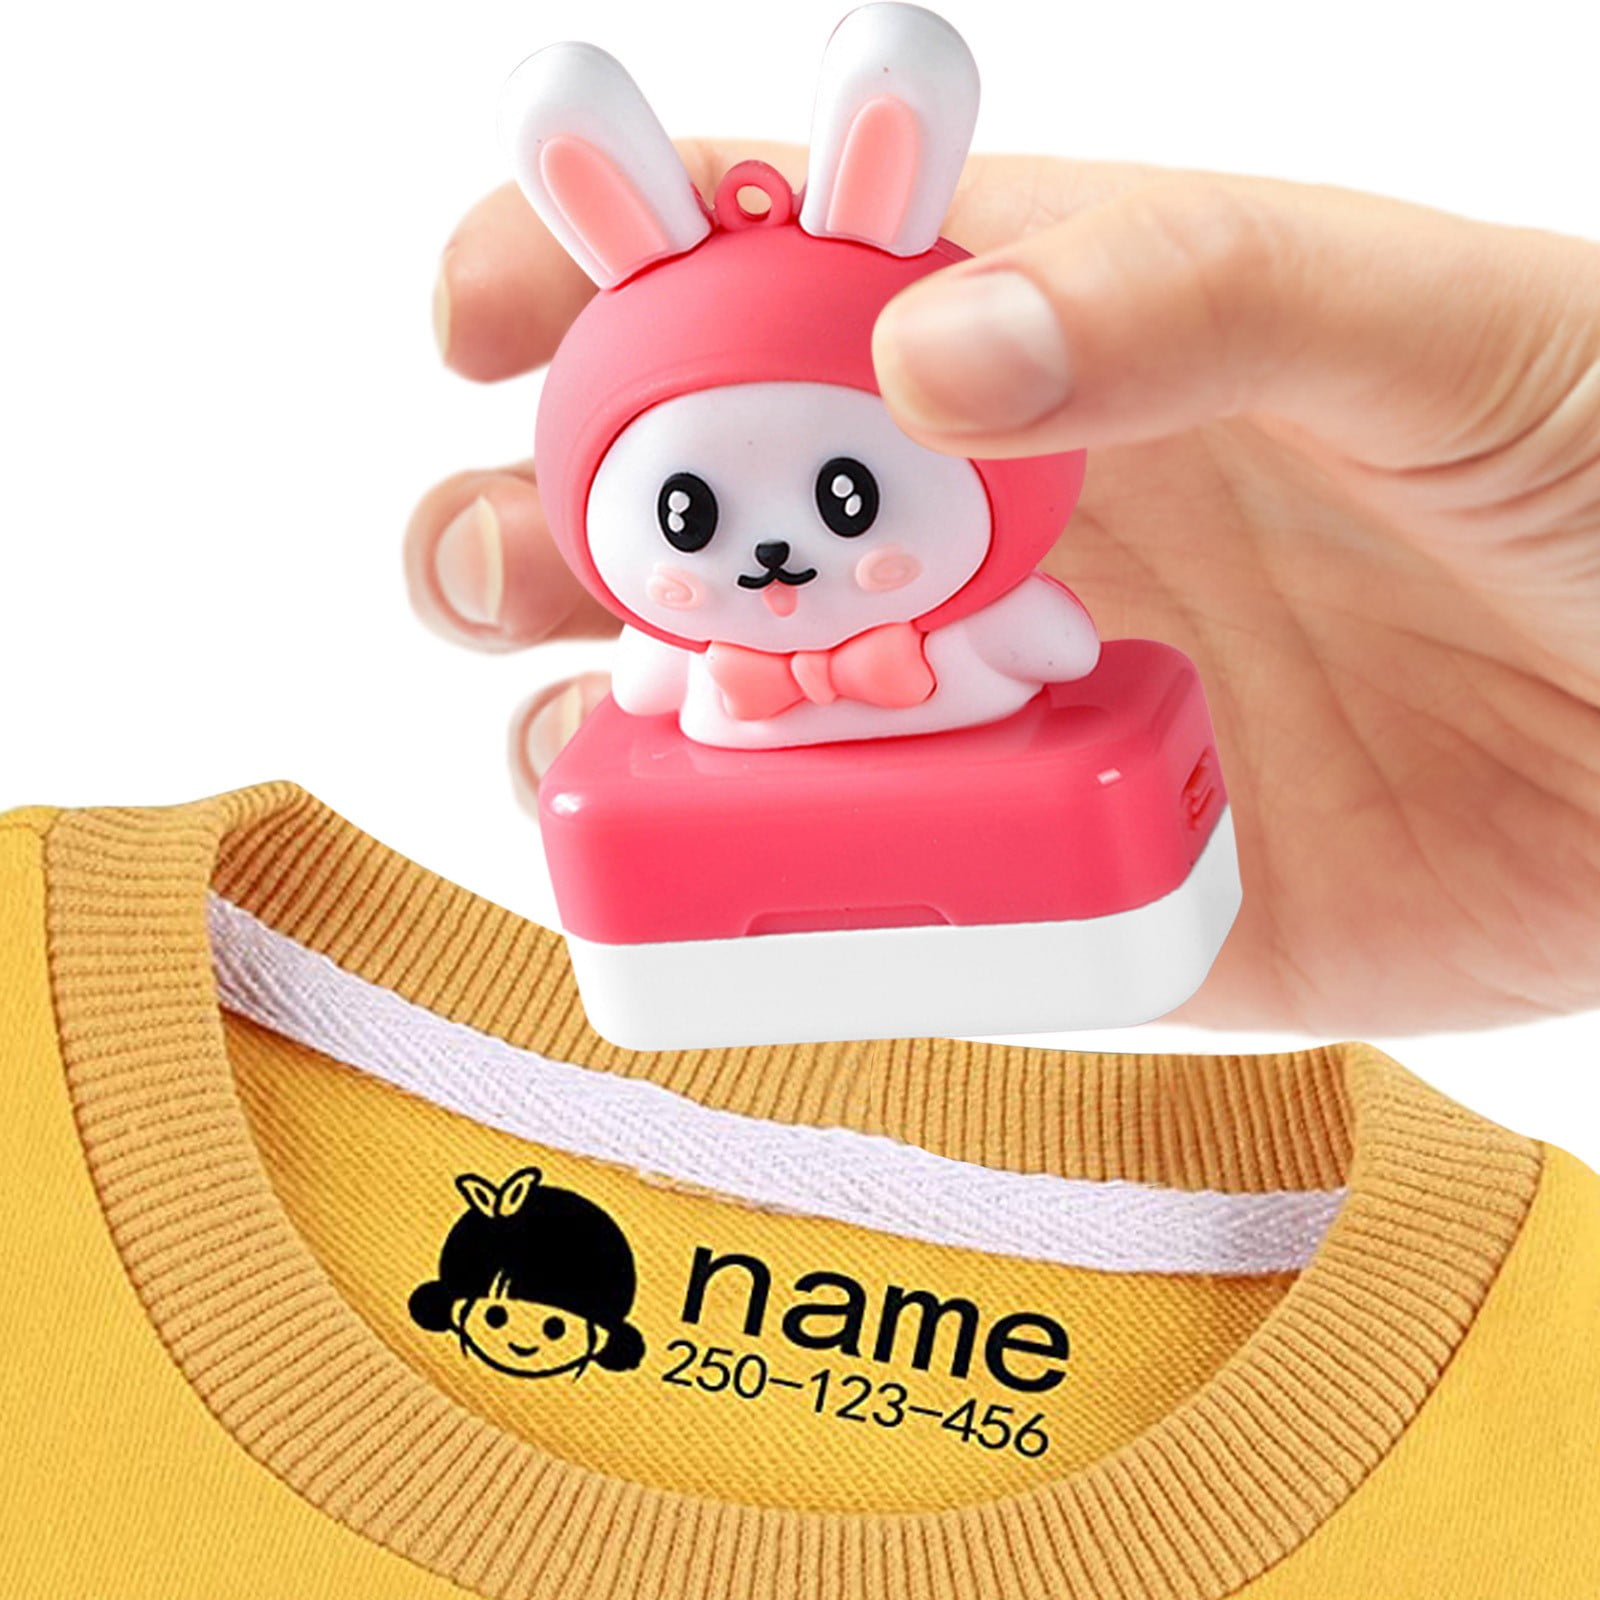 Name Stamp For Clothing, Personalized Stamps For Kids Clothes(not